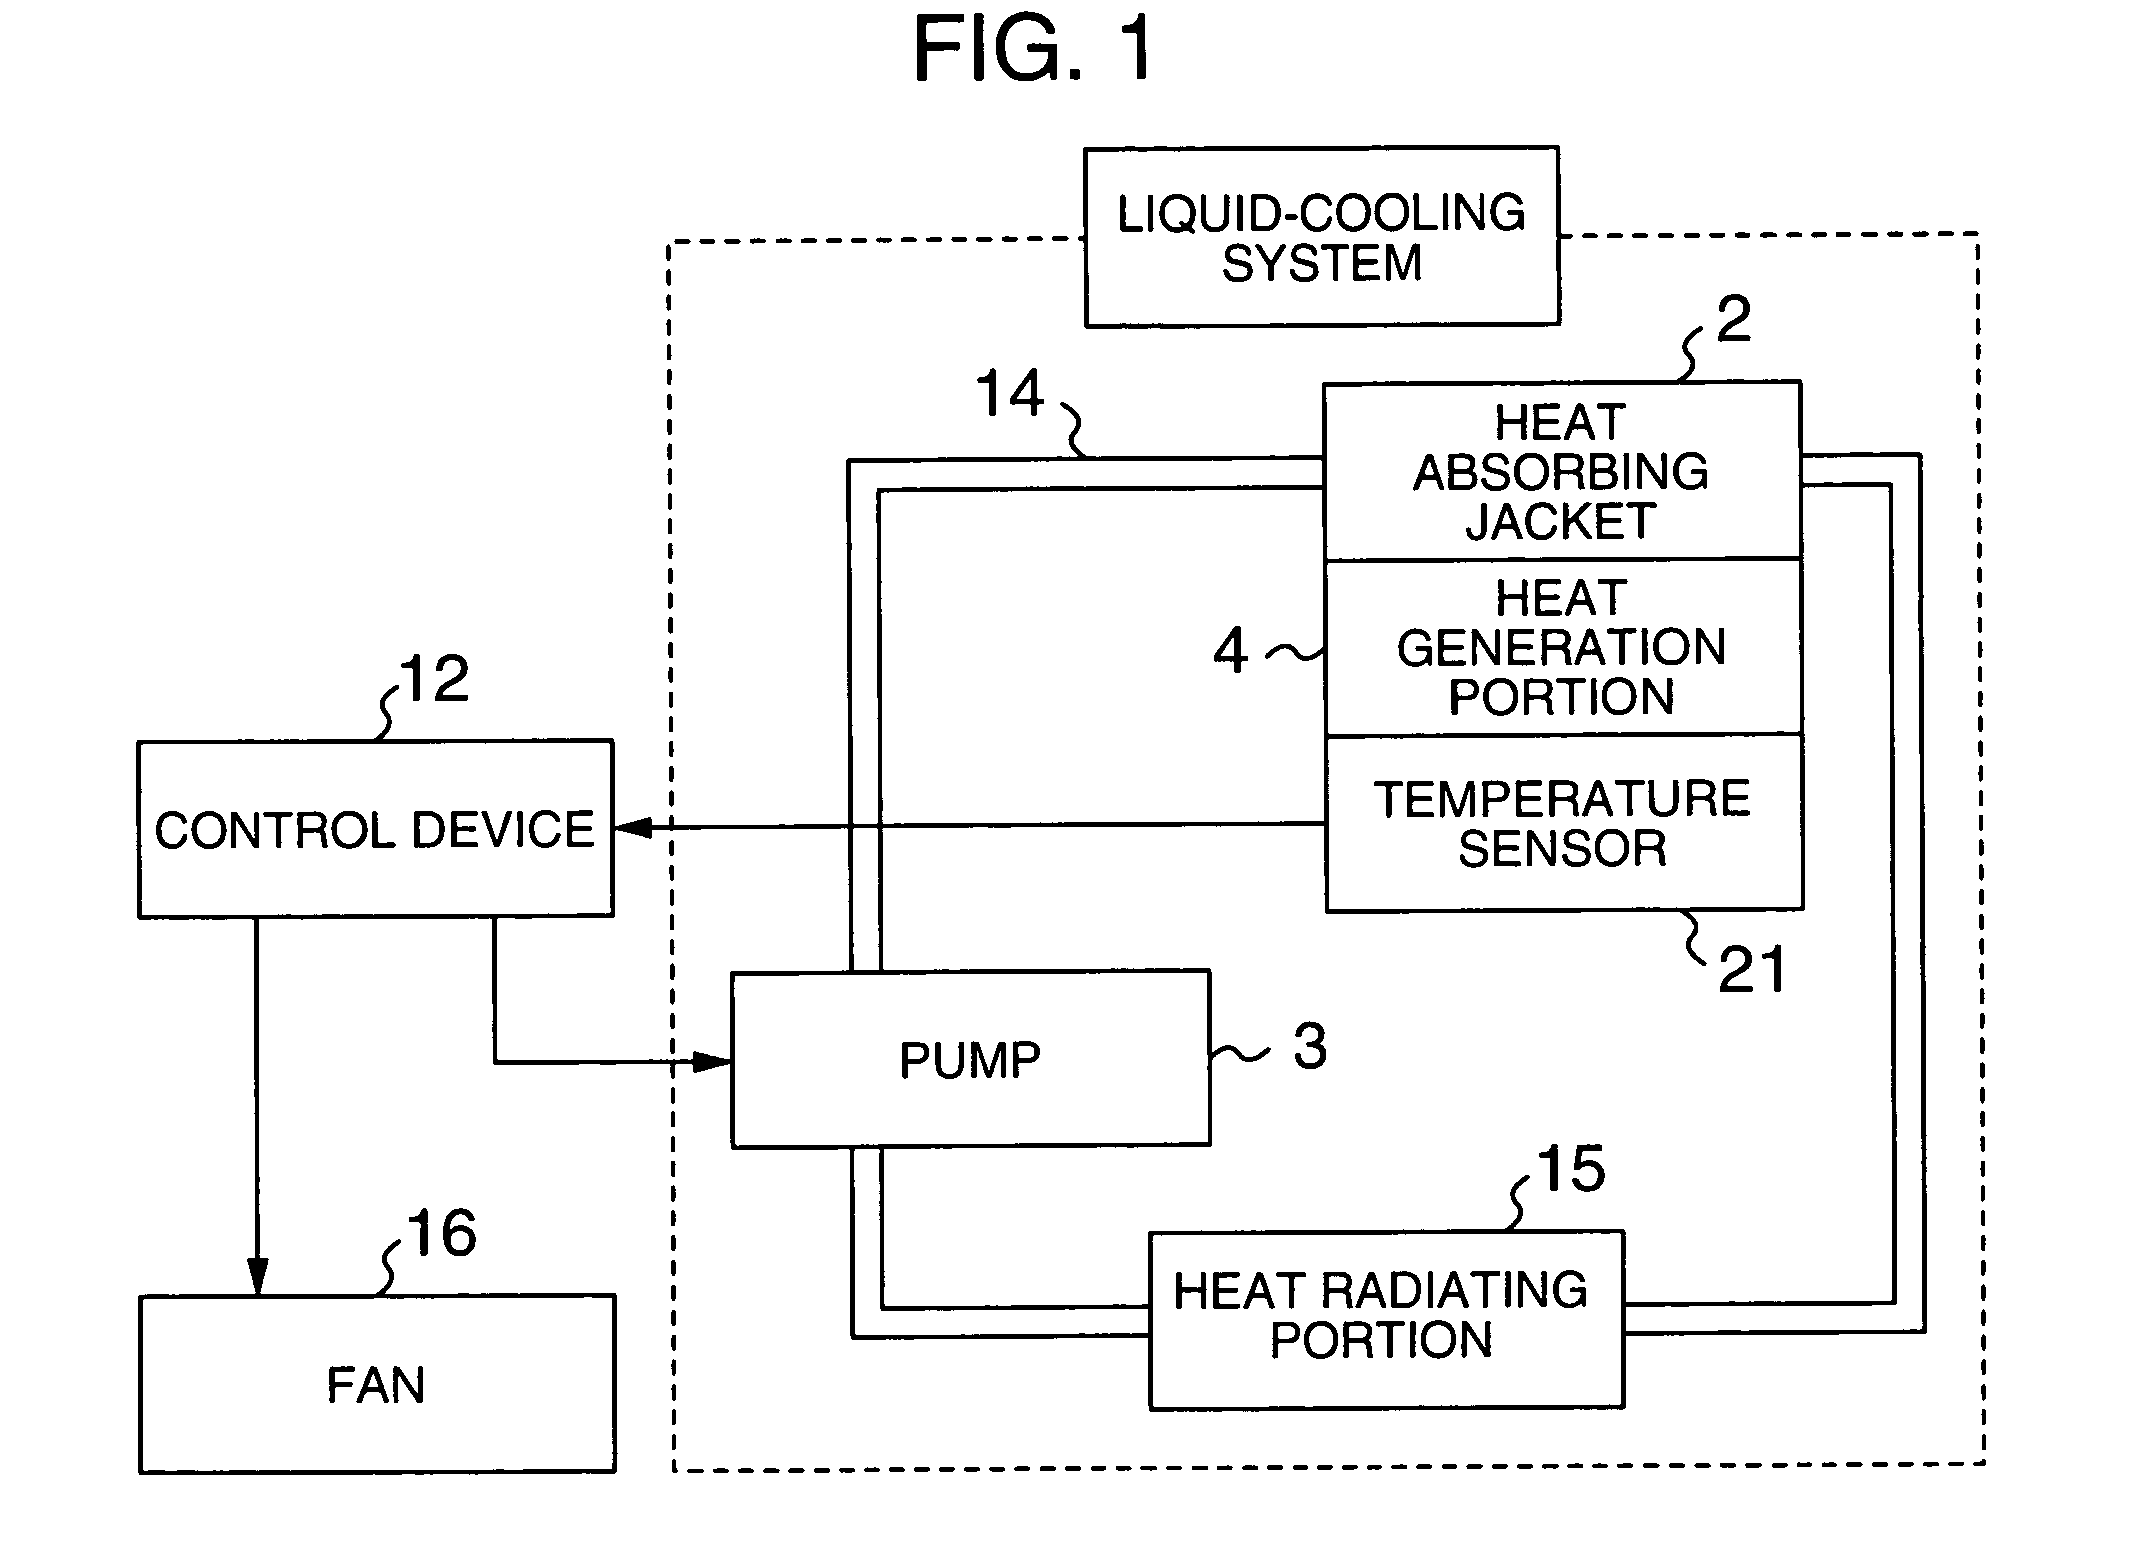 Electronic equipment provided with cooling system